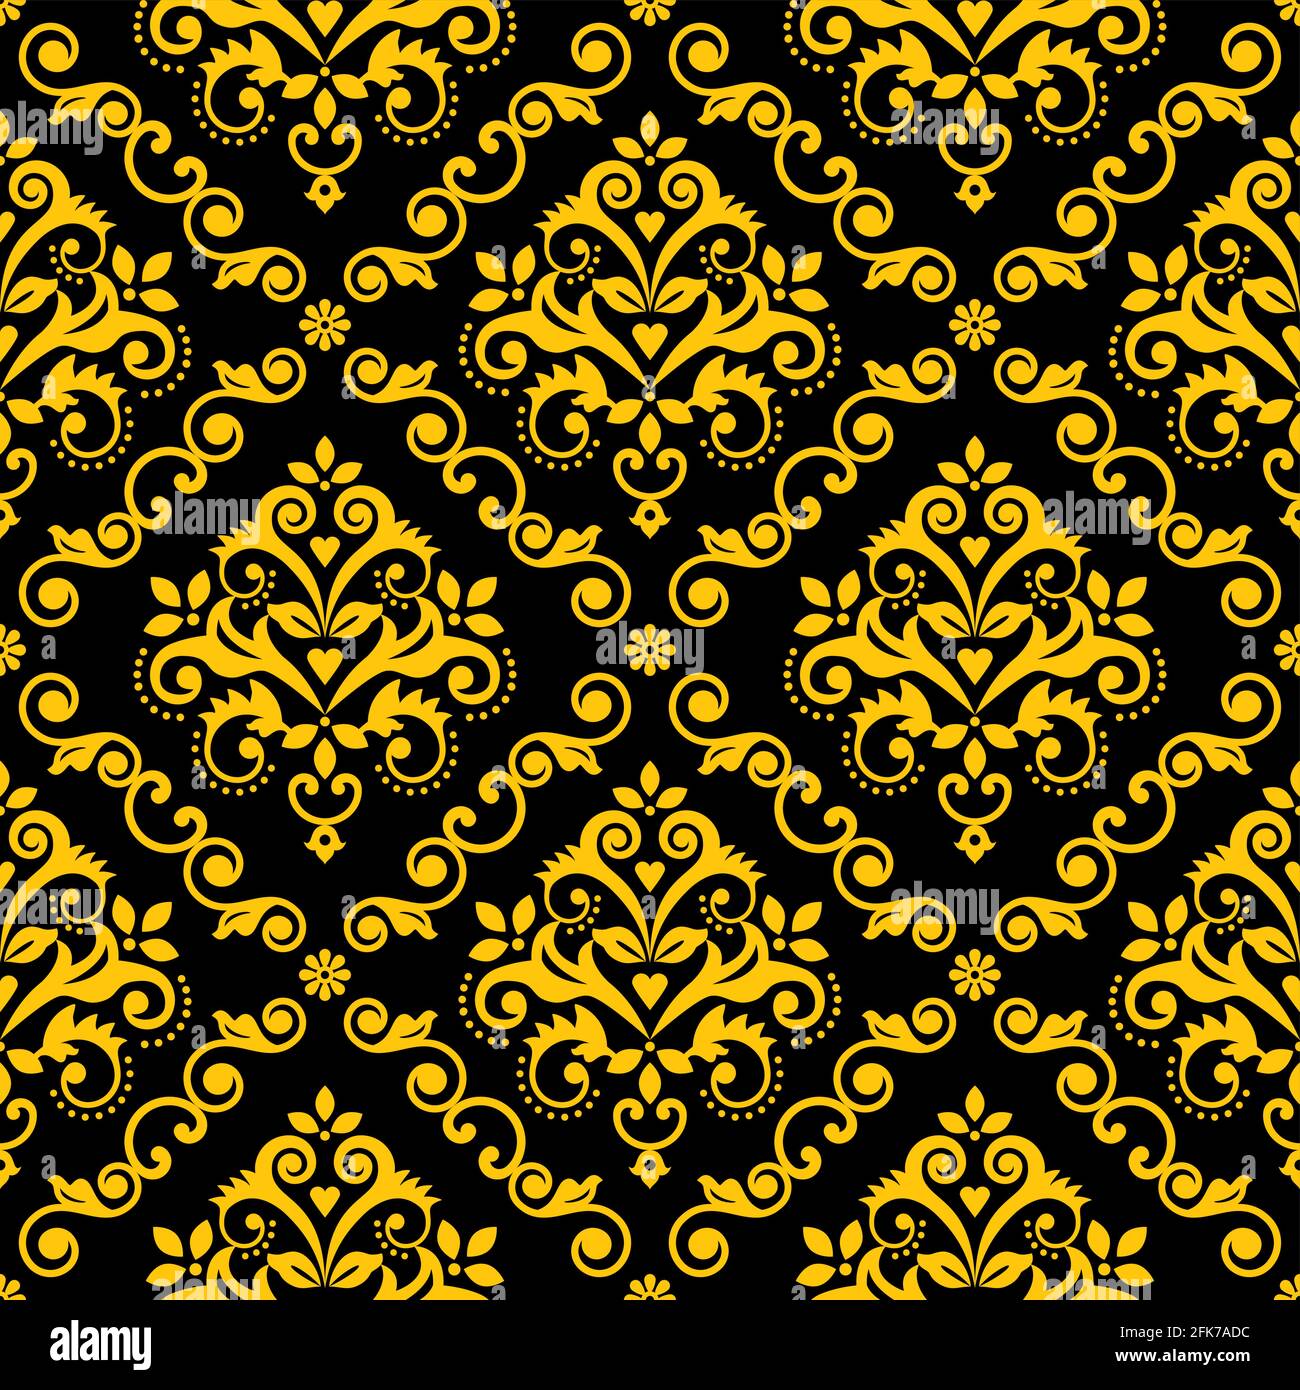 Classic Damask wallpaper or fabric print pattern, royal elegant textile vector seamless design with flowers, leaves and swirls in gold on black Stock Vector